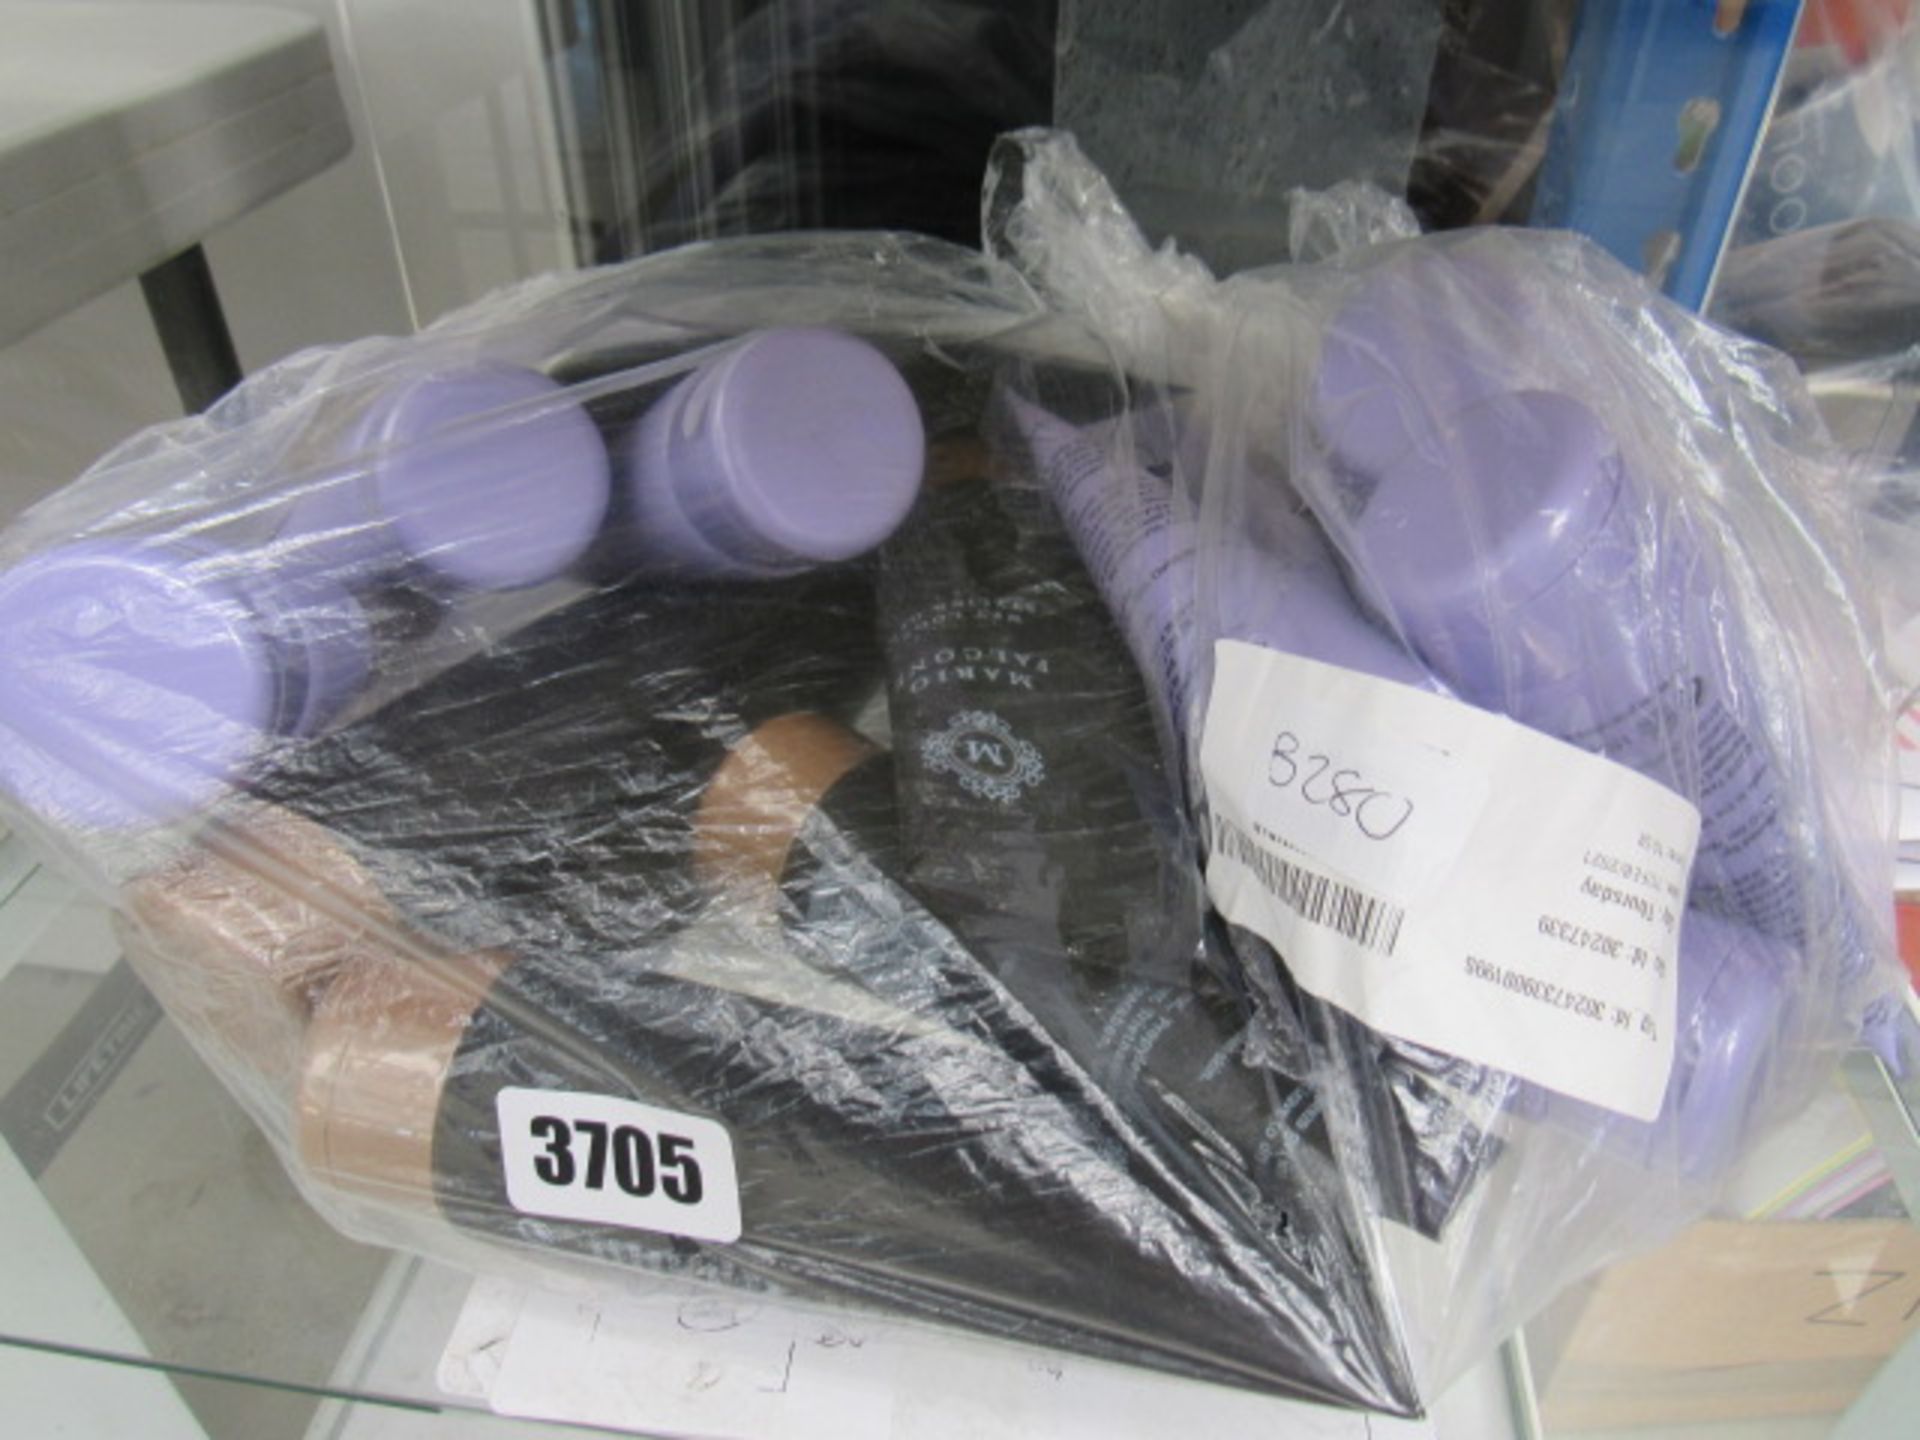 Bag containing various body lotions